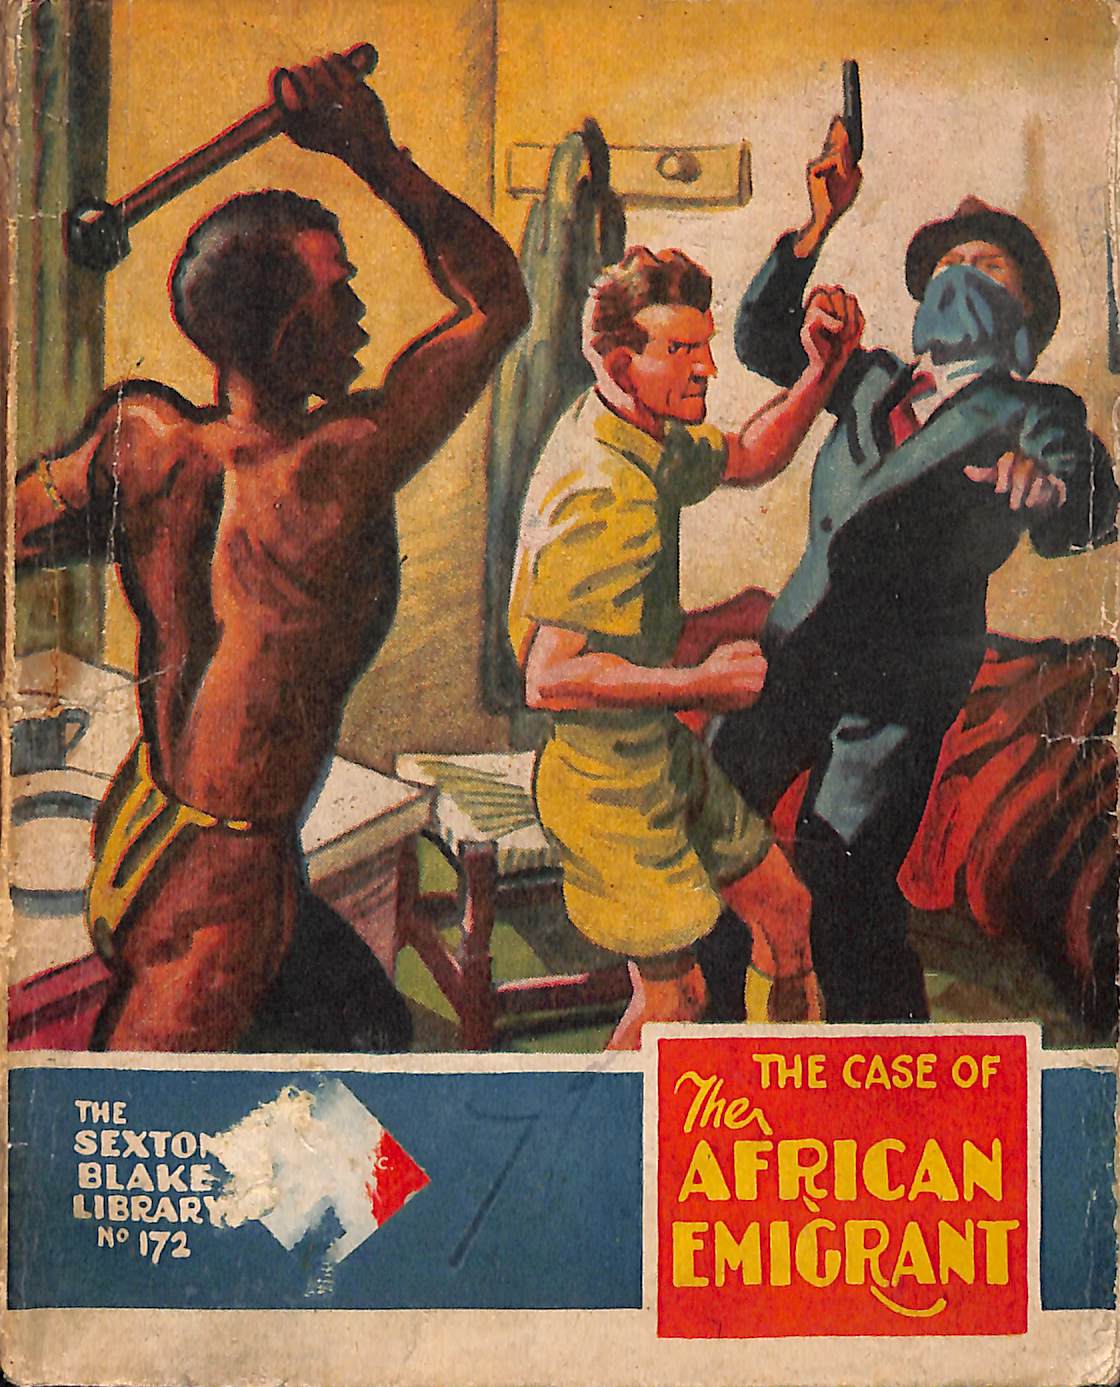 Book Cover For Sexton Blake Library S3 172 - The Case of the African Emigrant